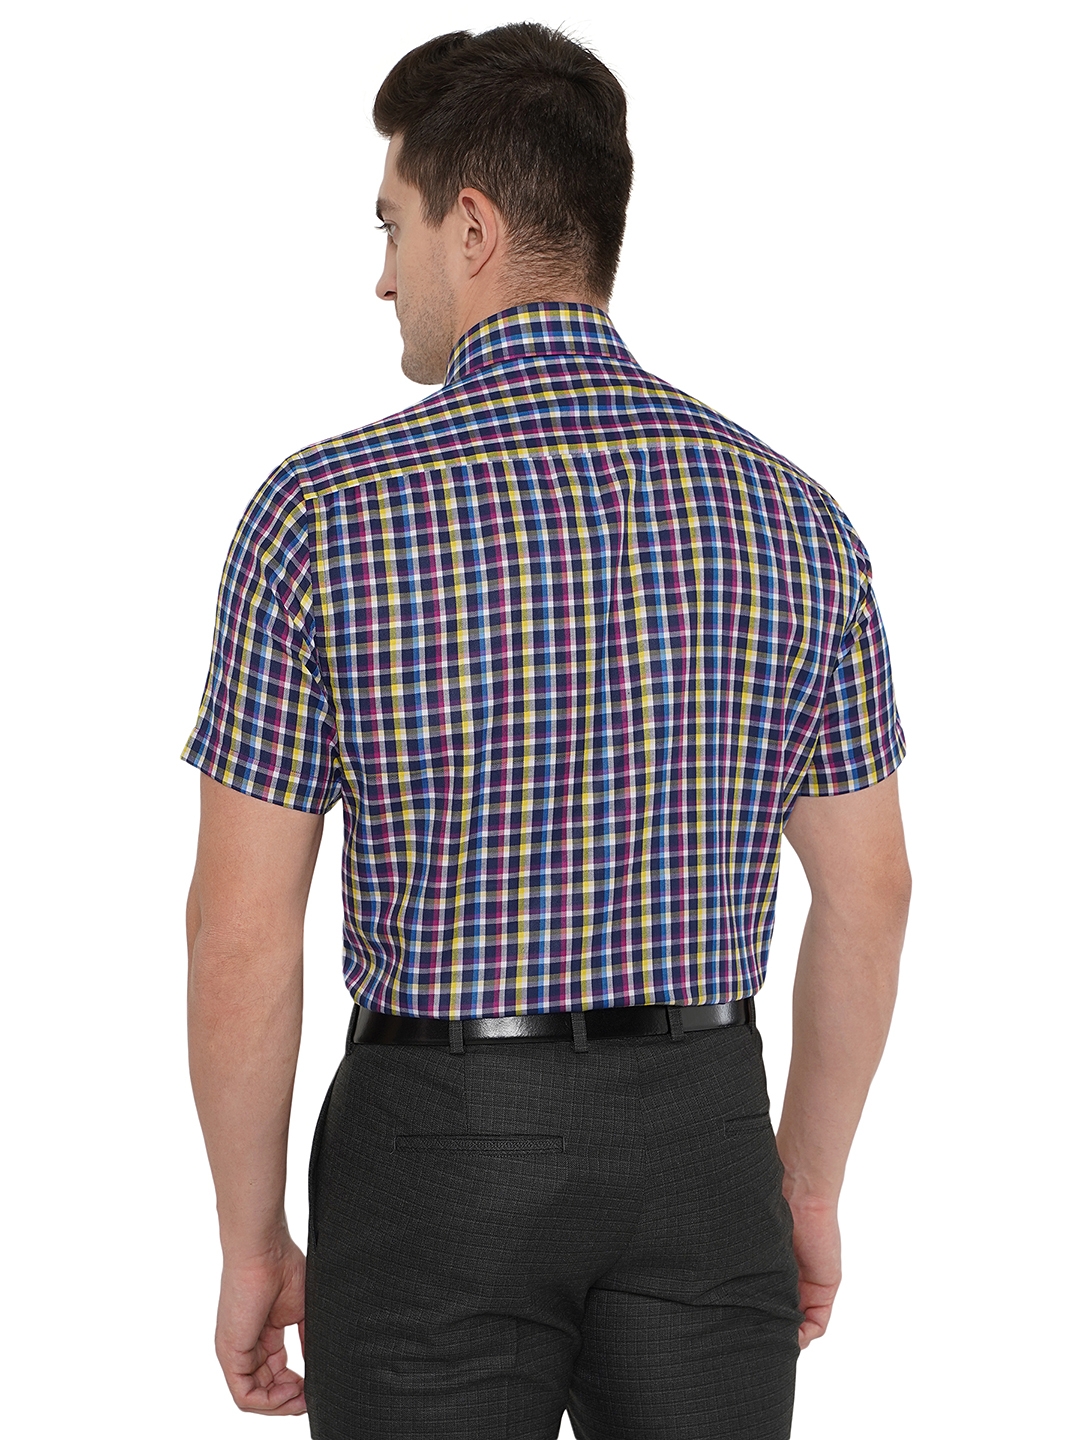 Greenfibre | White & Blue Checked Regular Fit Formal Shirt | Greenfibre 2